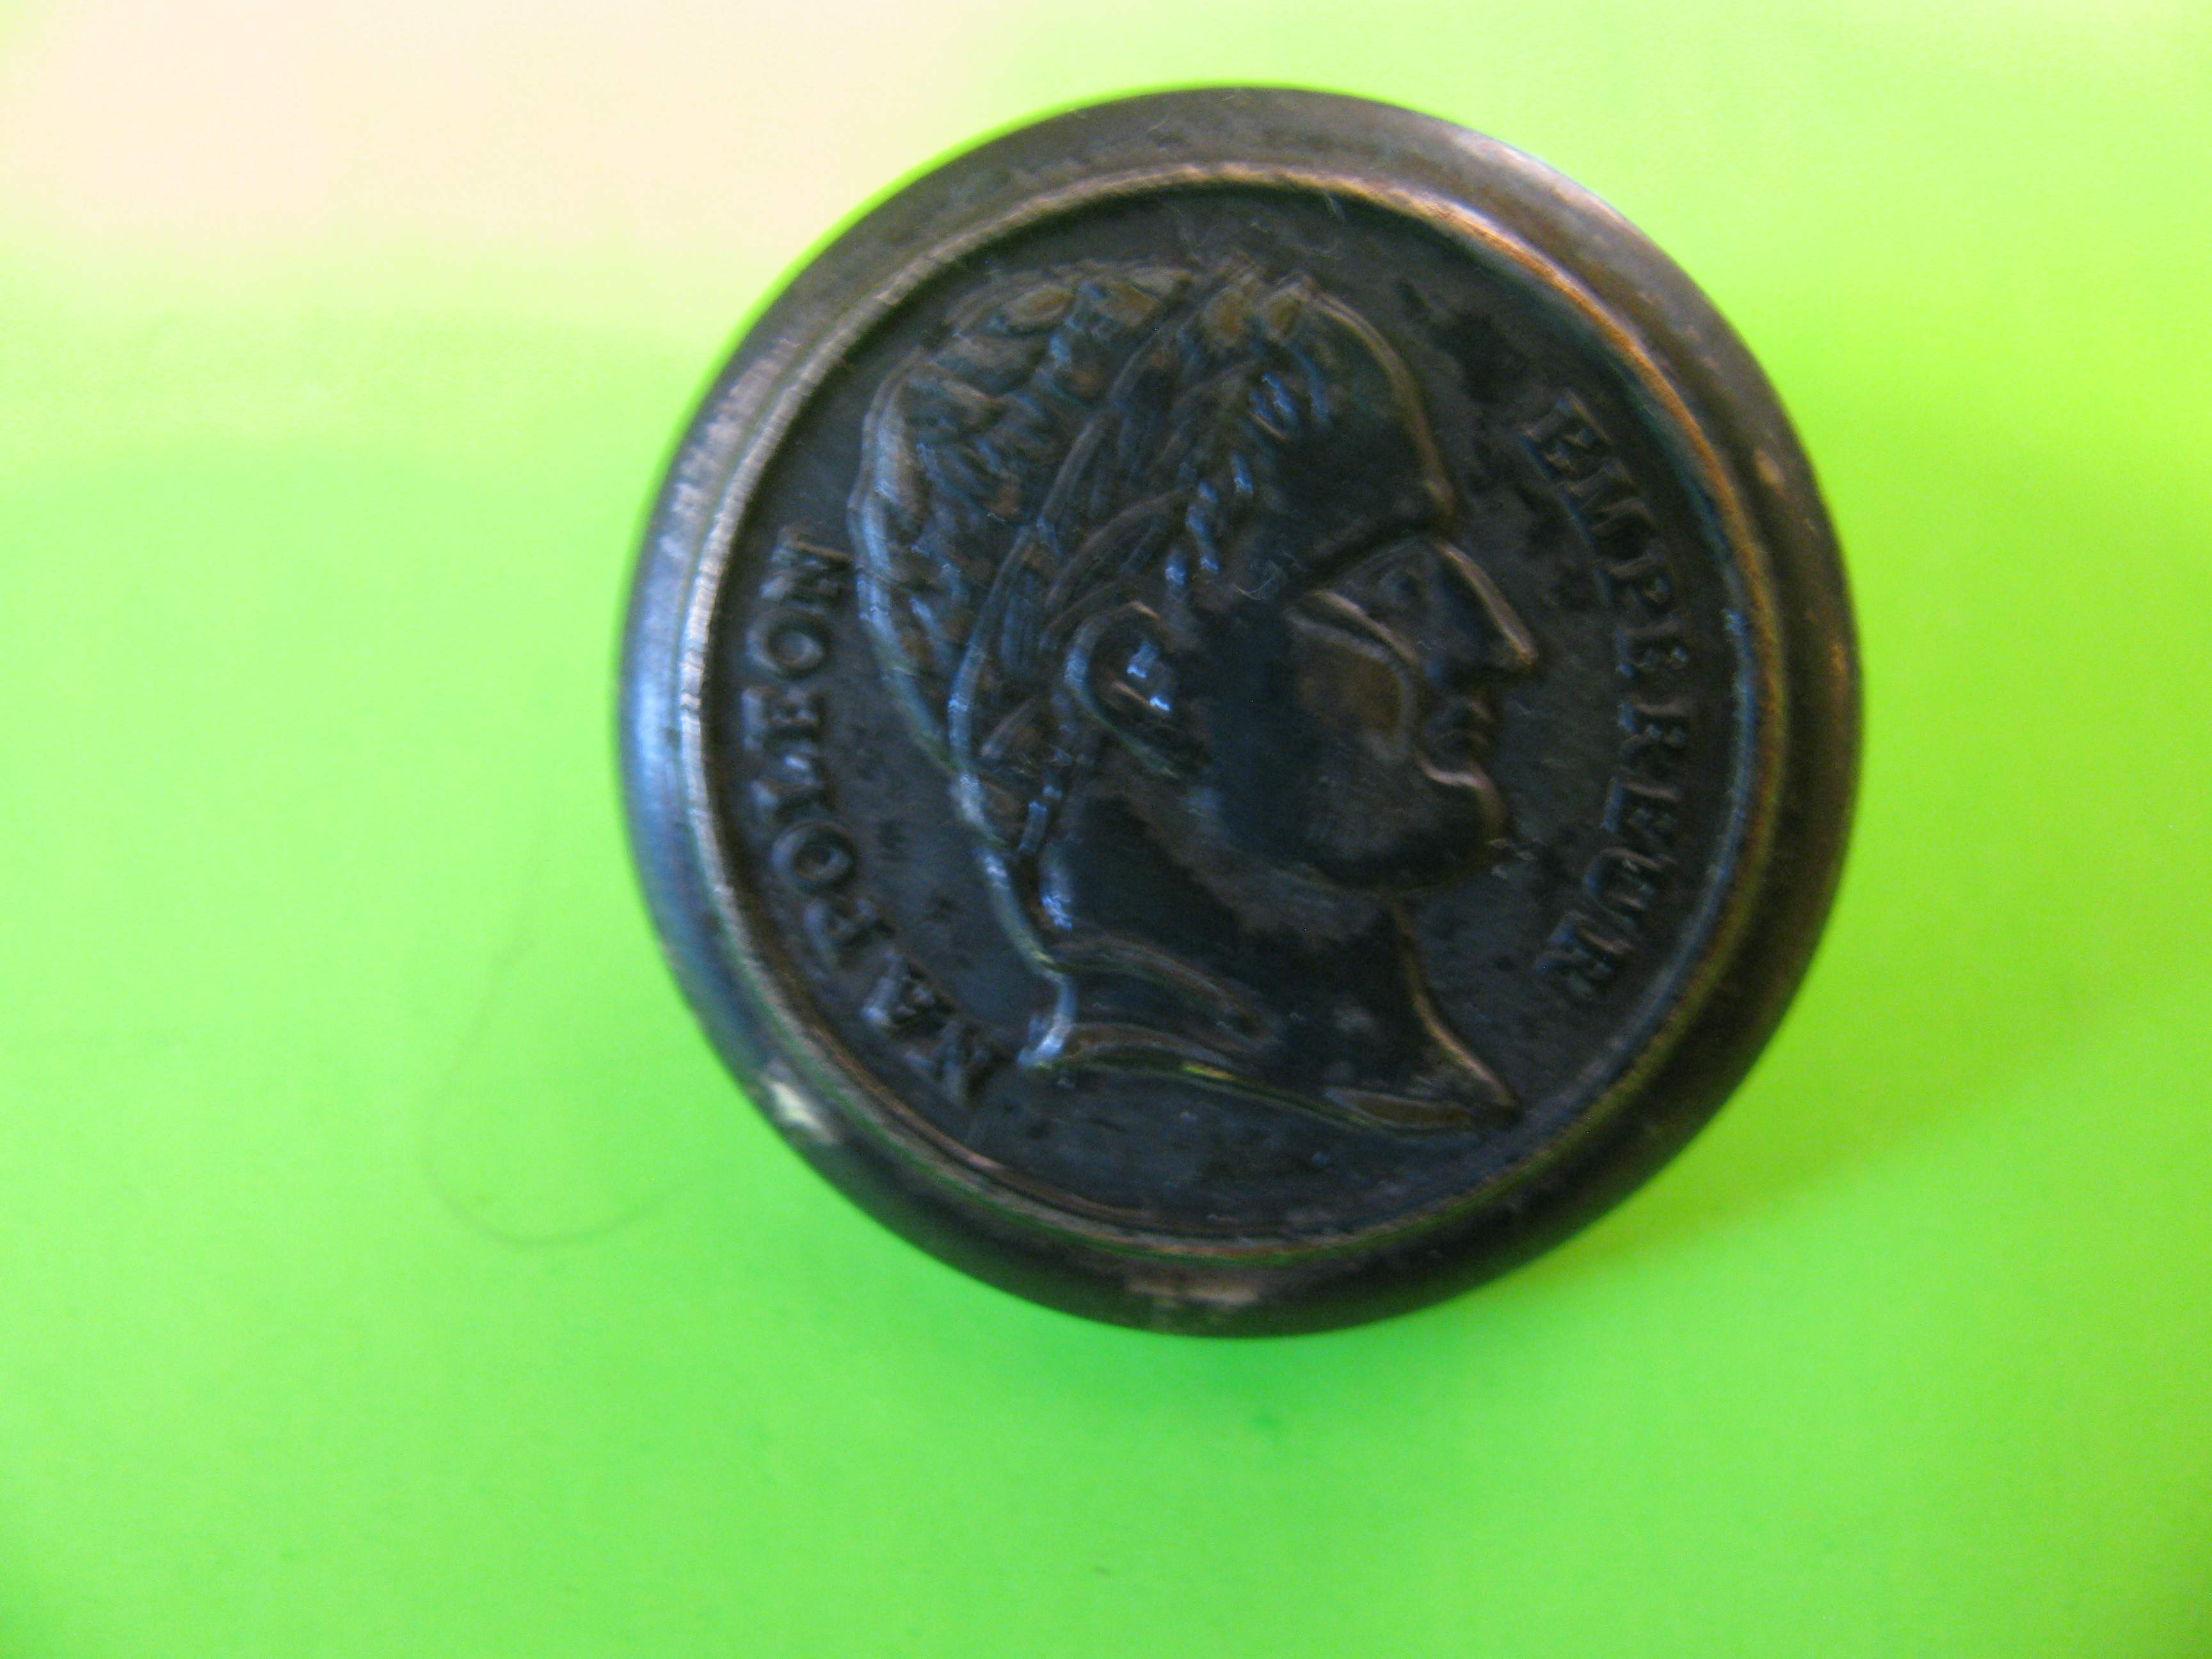 * SOLD * EMPEREUR NAPOLEON on Metal Button with Metal Loop Shank